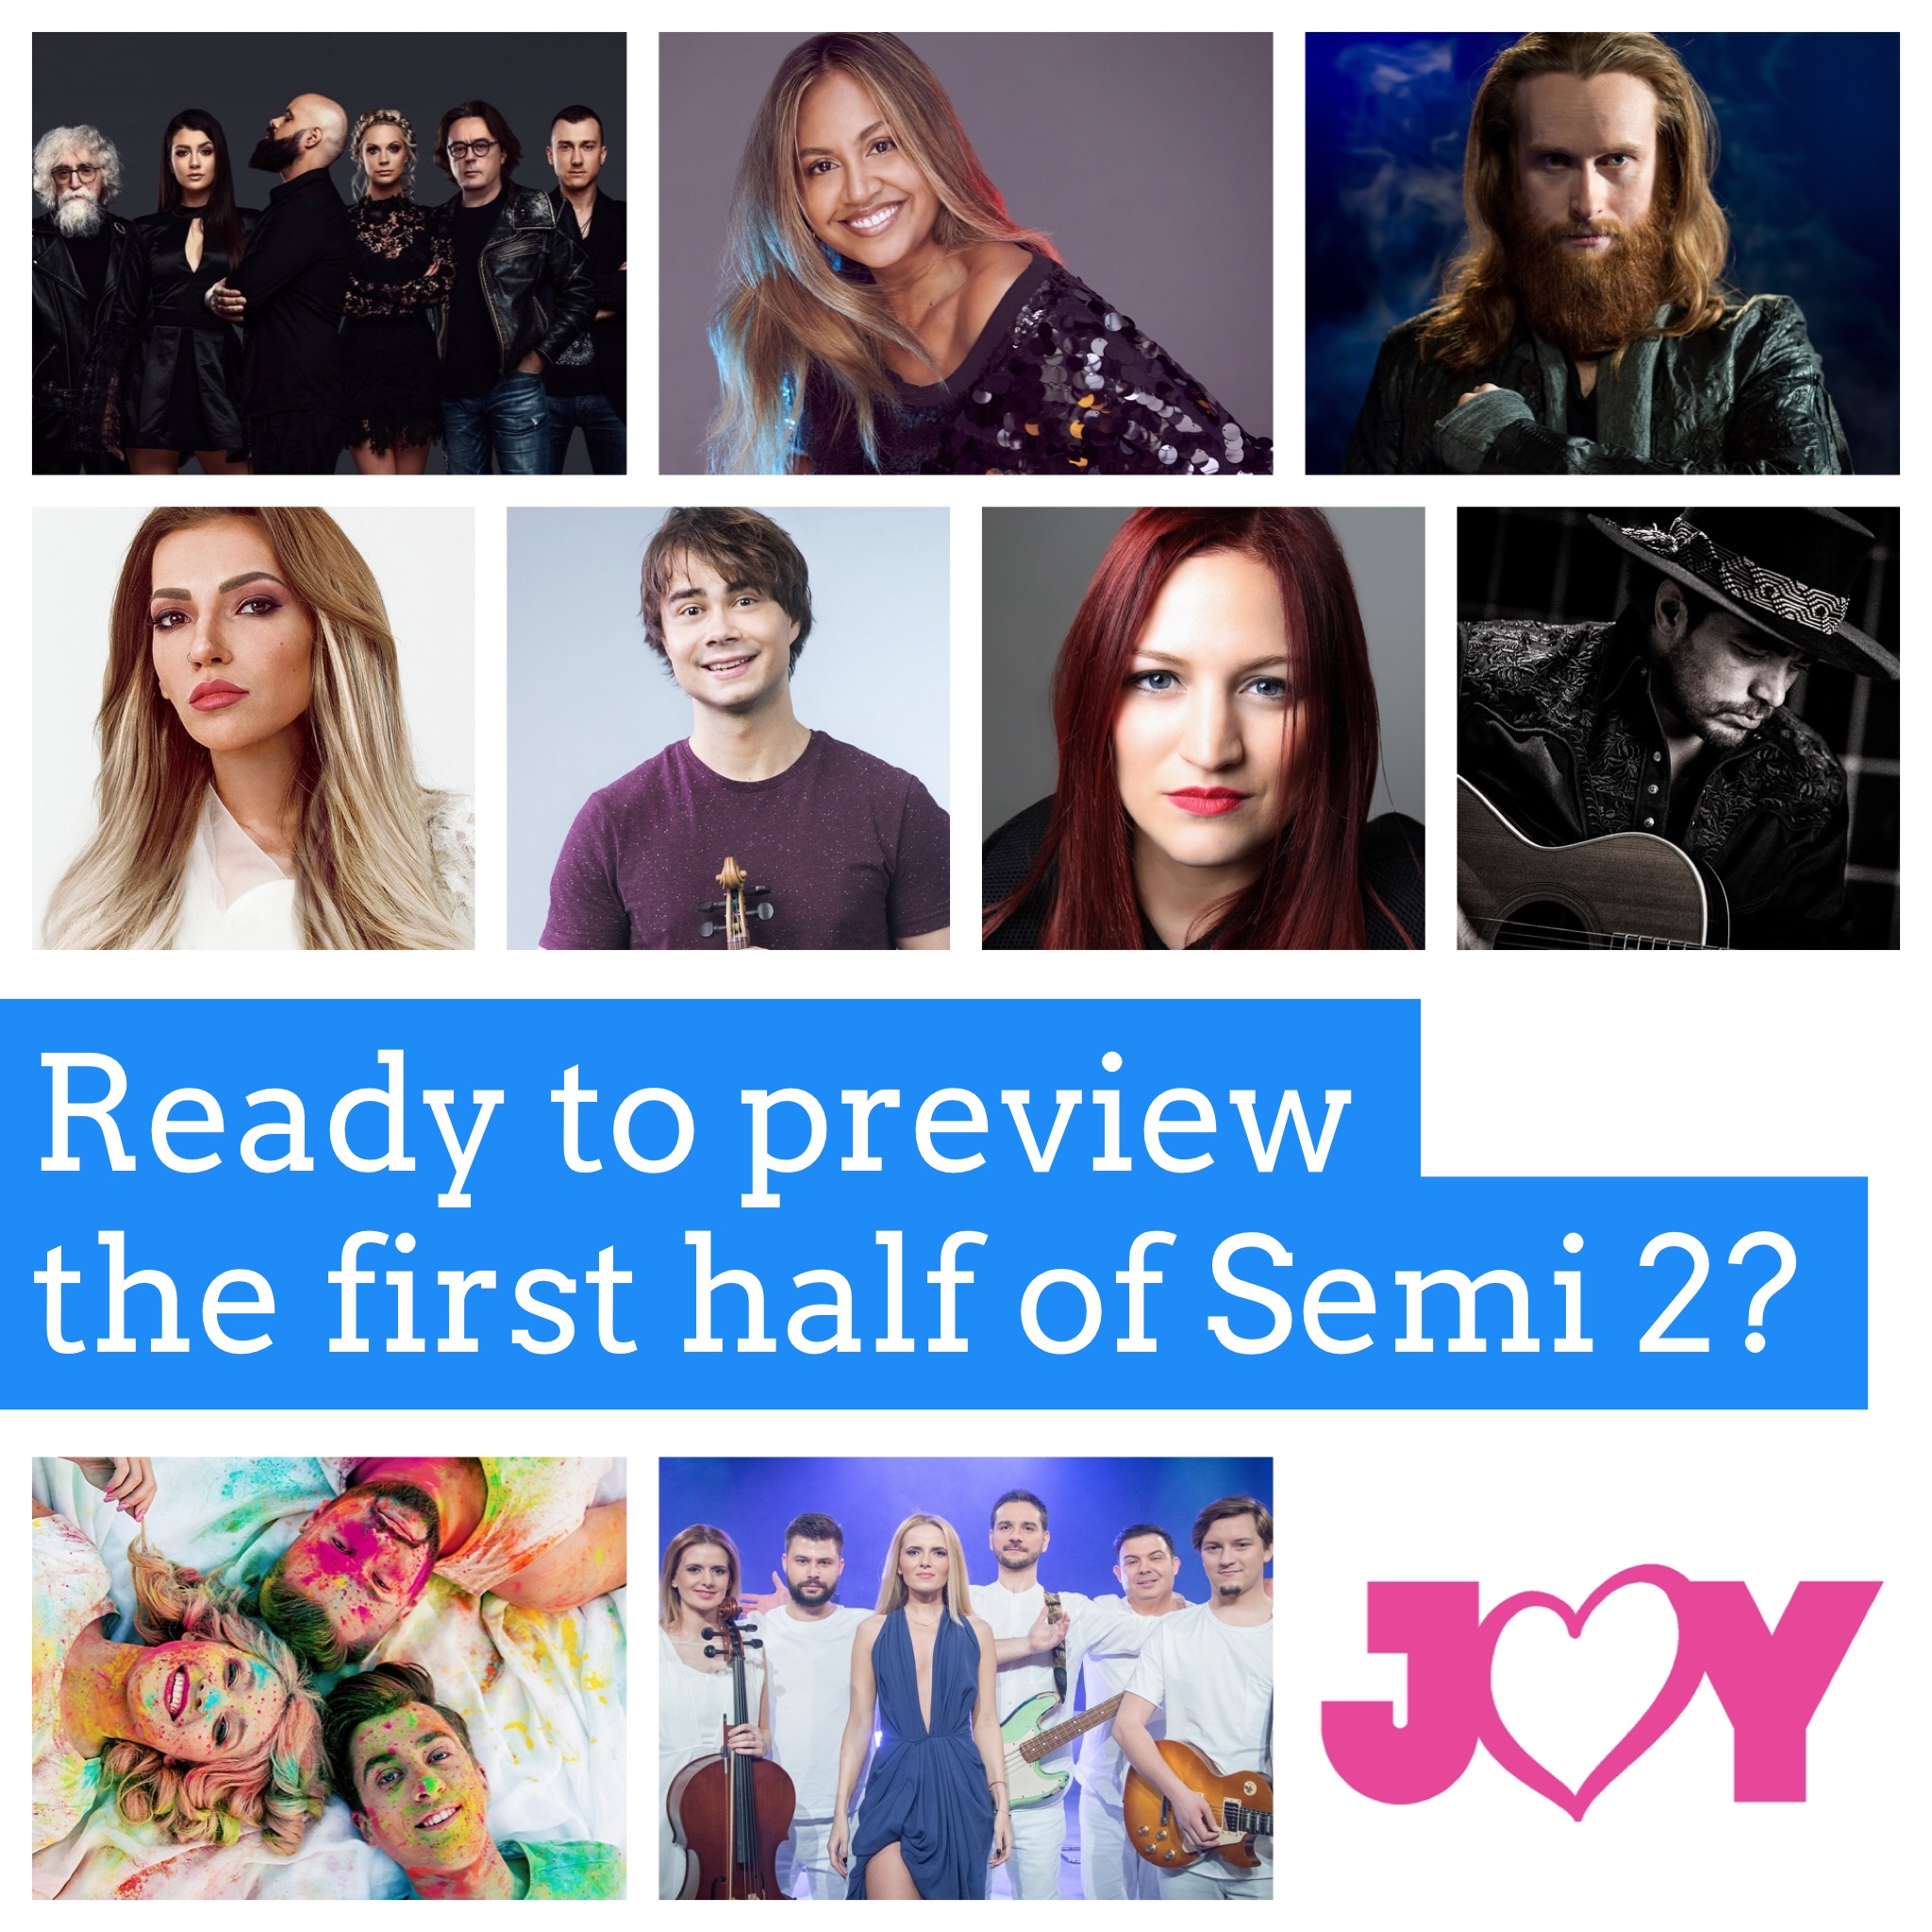 Eurovision 2018: Previewing the first half of Semi Final 2